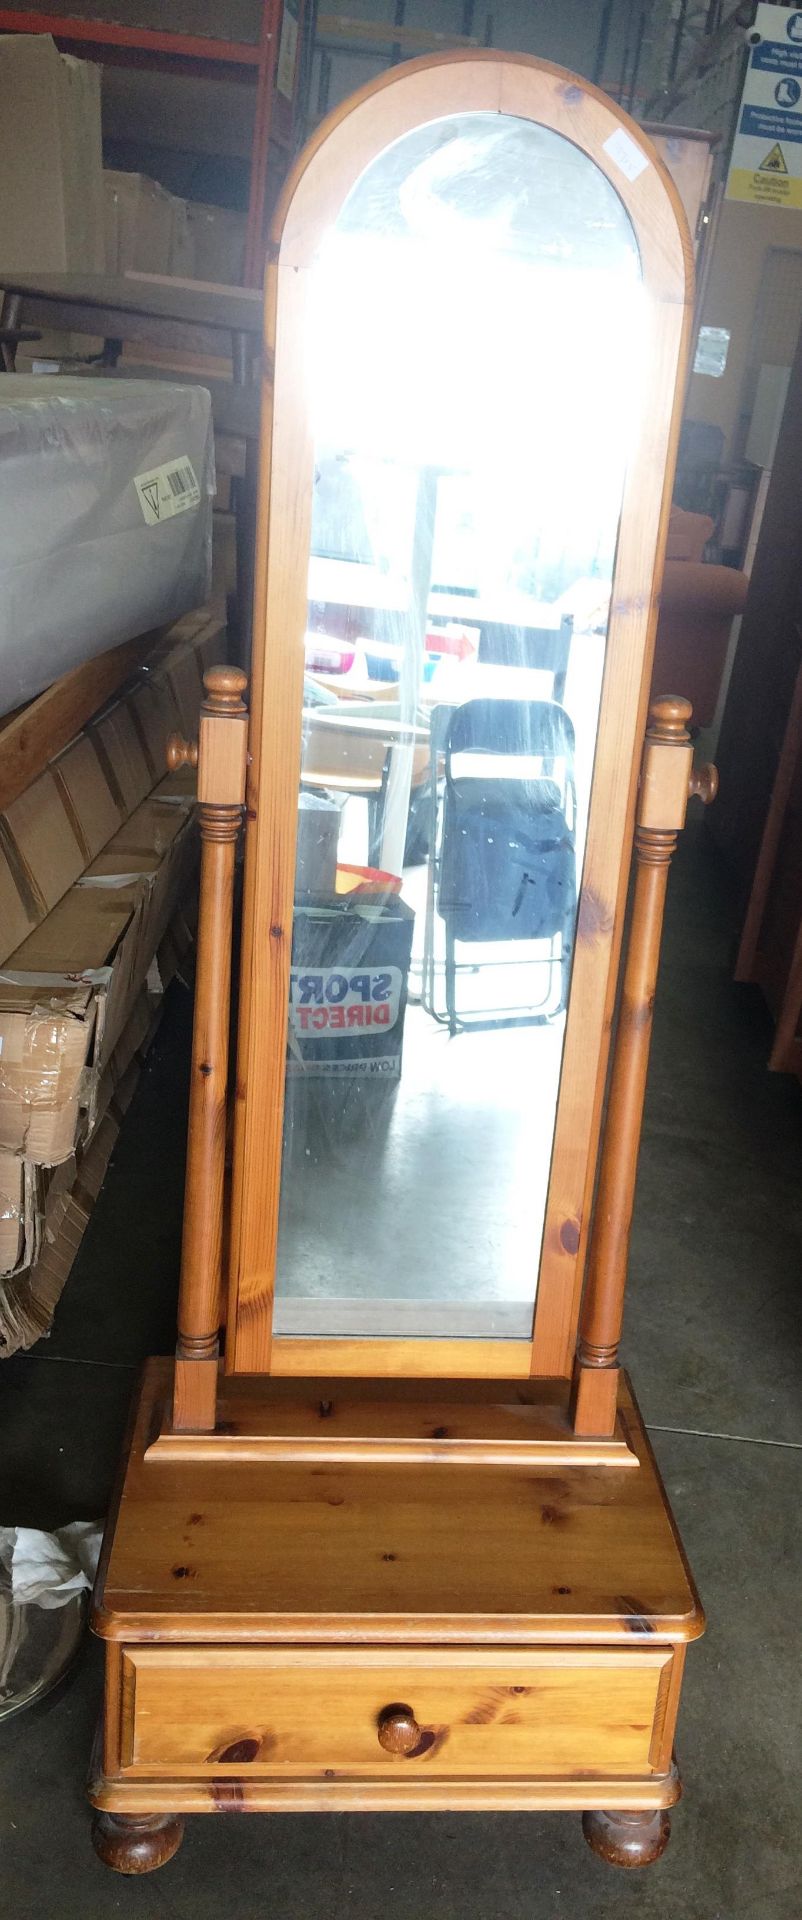 A modern pine cheval mirror with underdrawer (left back foot part missing)